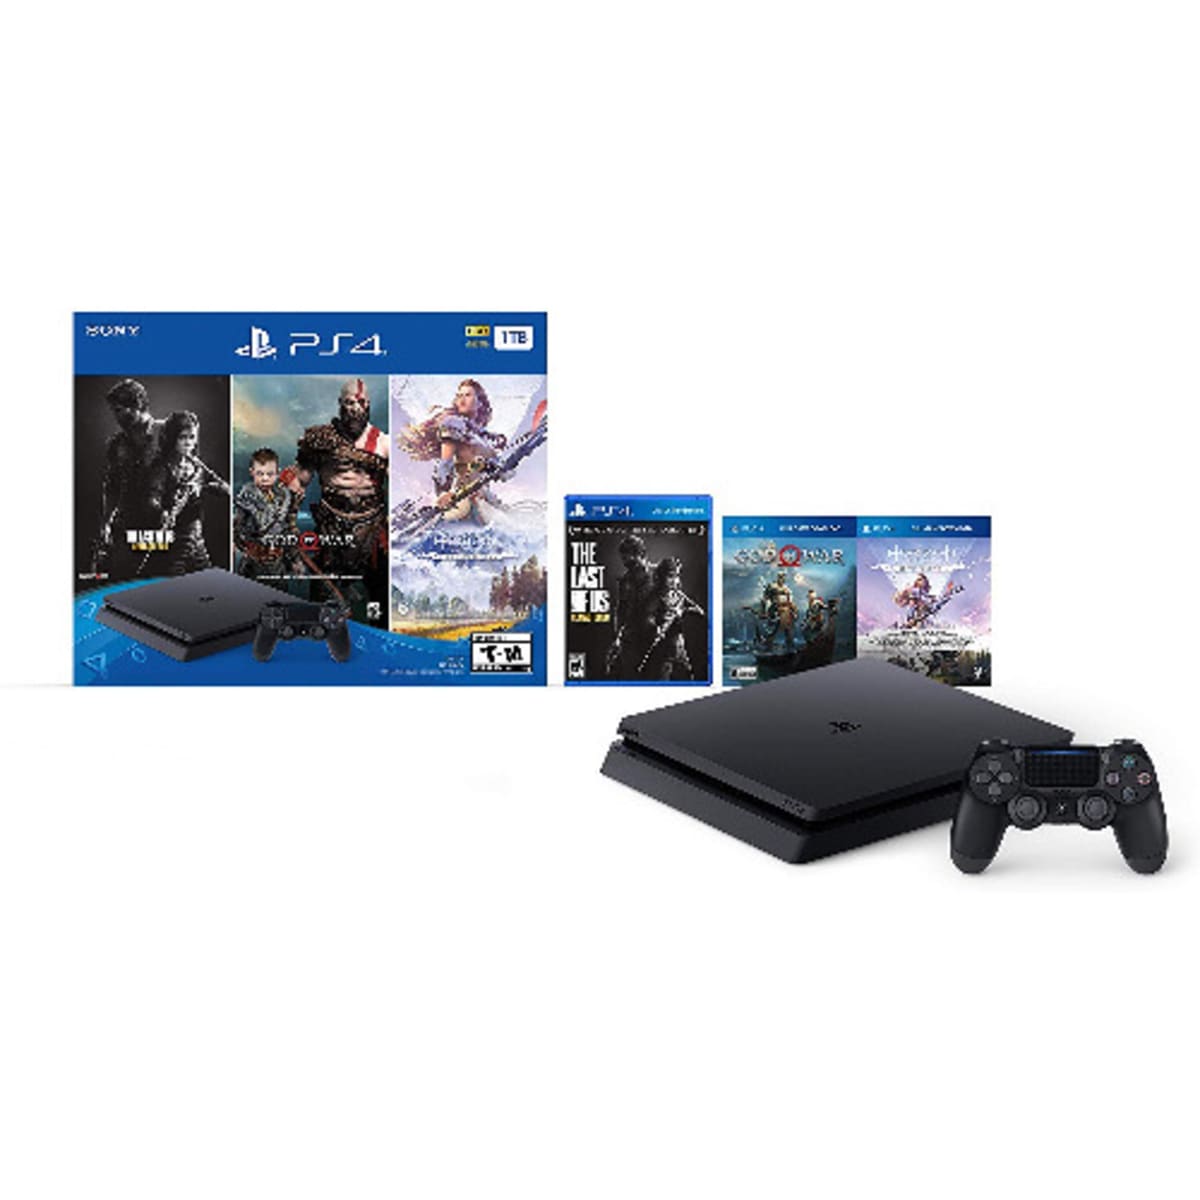 Shop Best PS4 Games Online - Buy PS4 Games @ Lowest Prices - Jumia